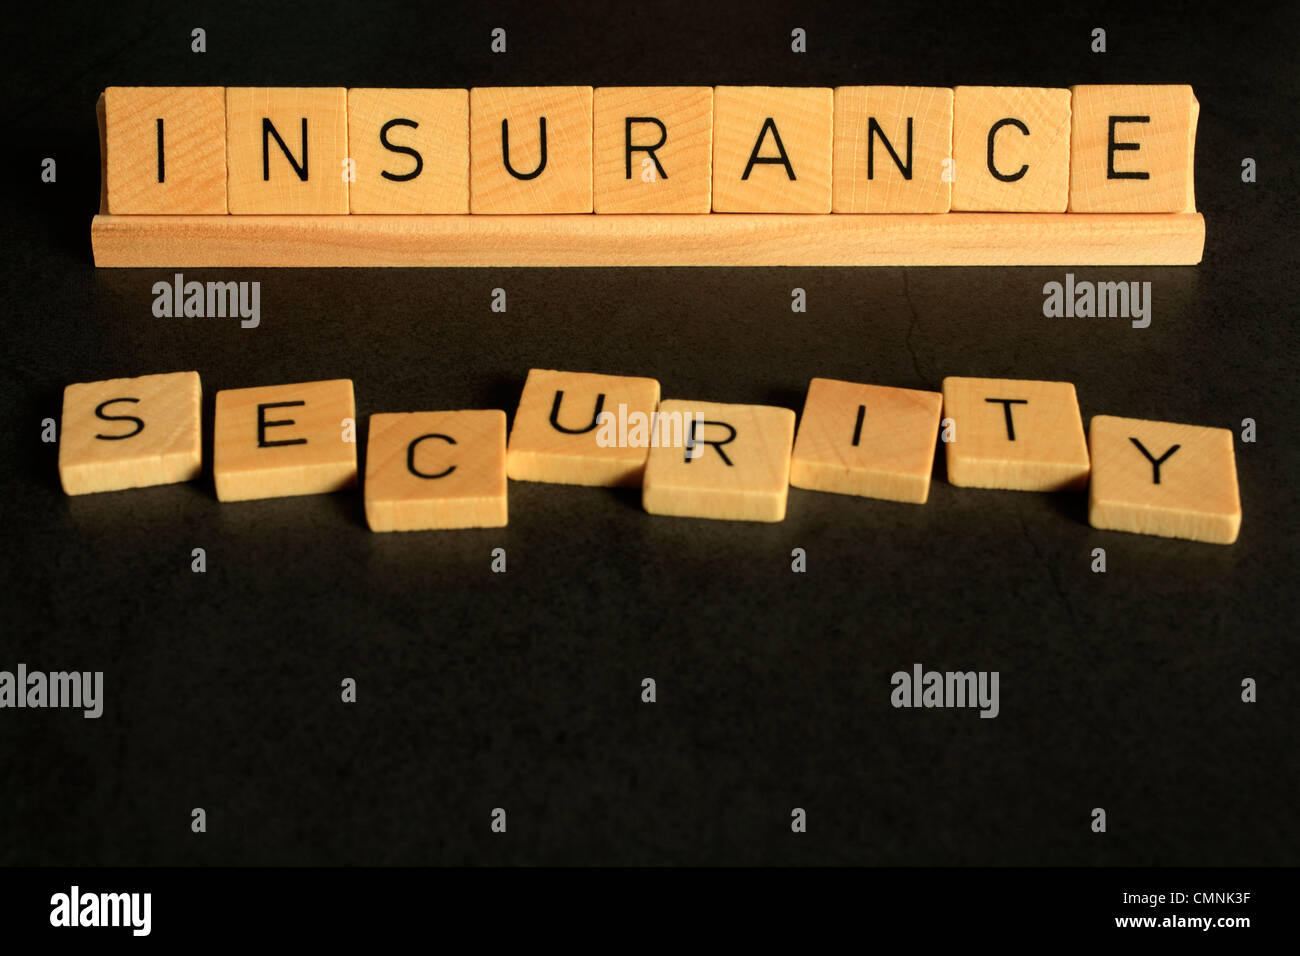 Insurance and security cpncept, with words spelled out in alphabet letters. On a dark, textured background. Stock Photo